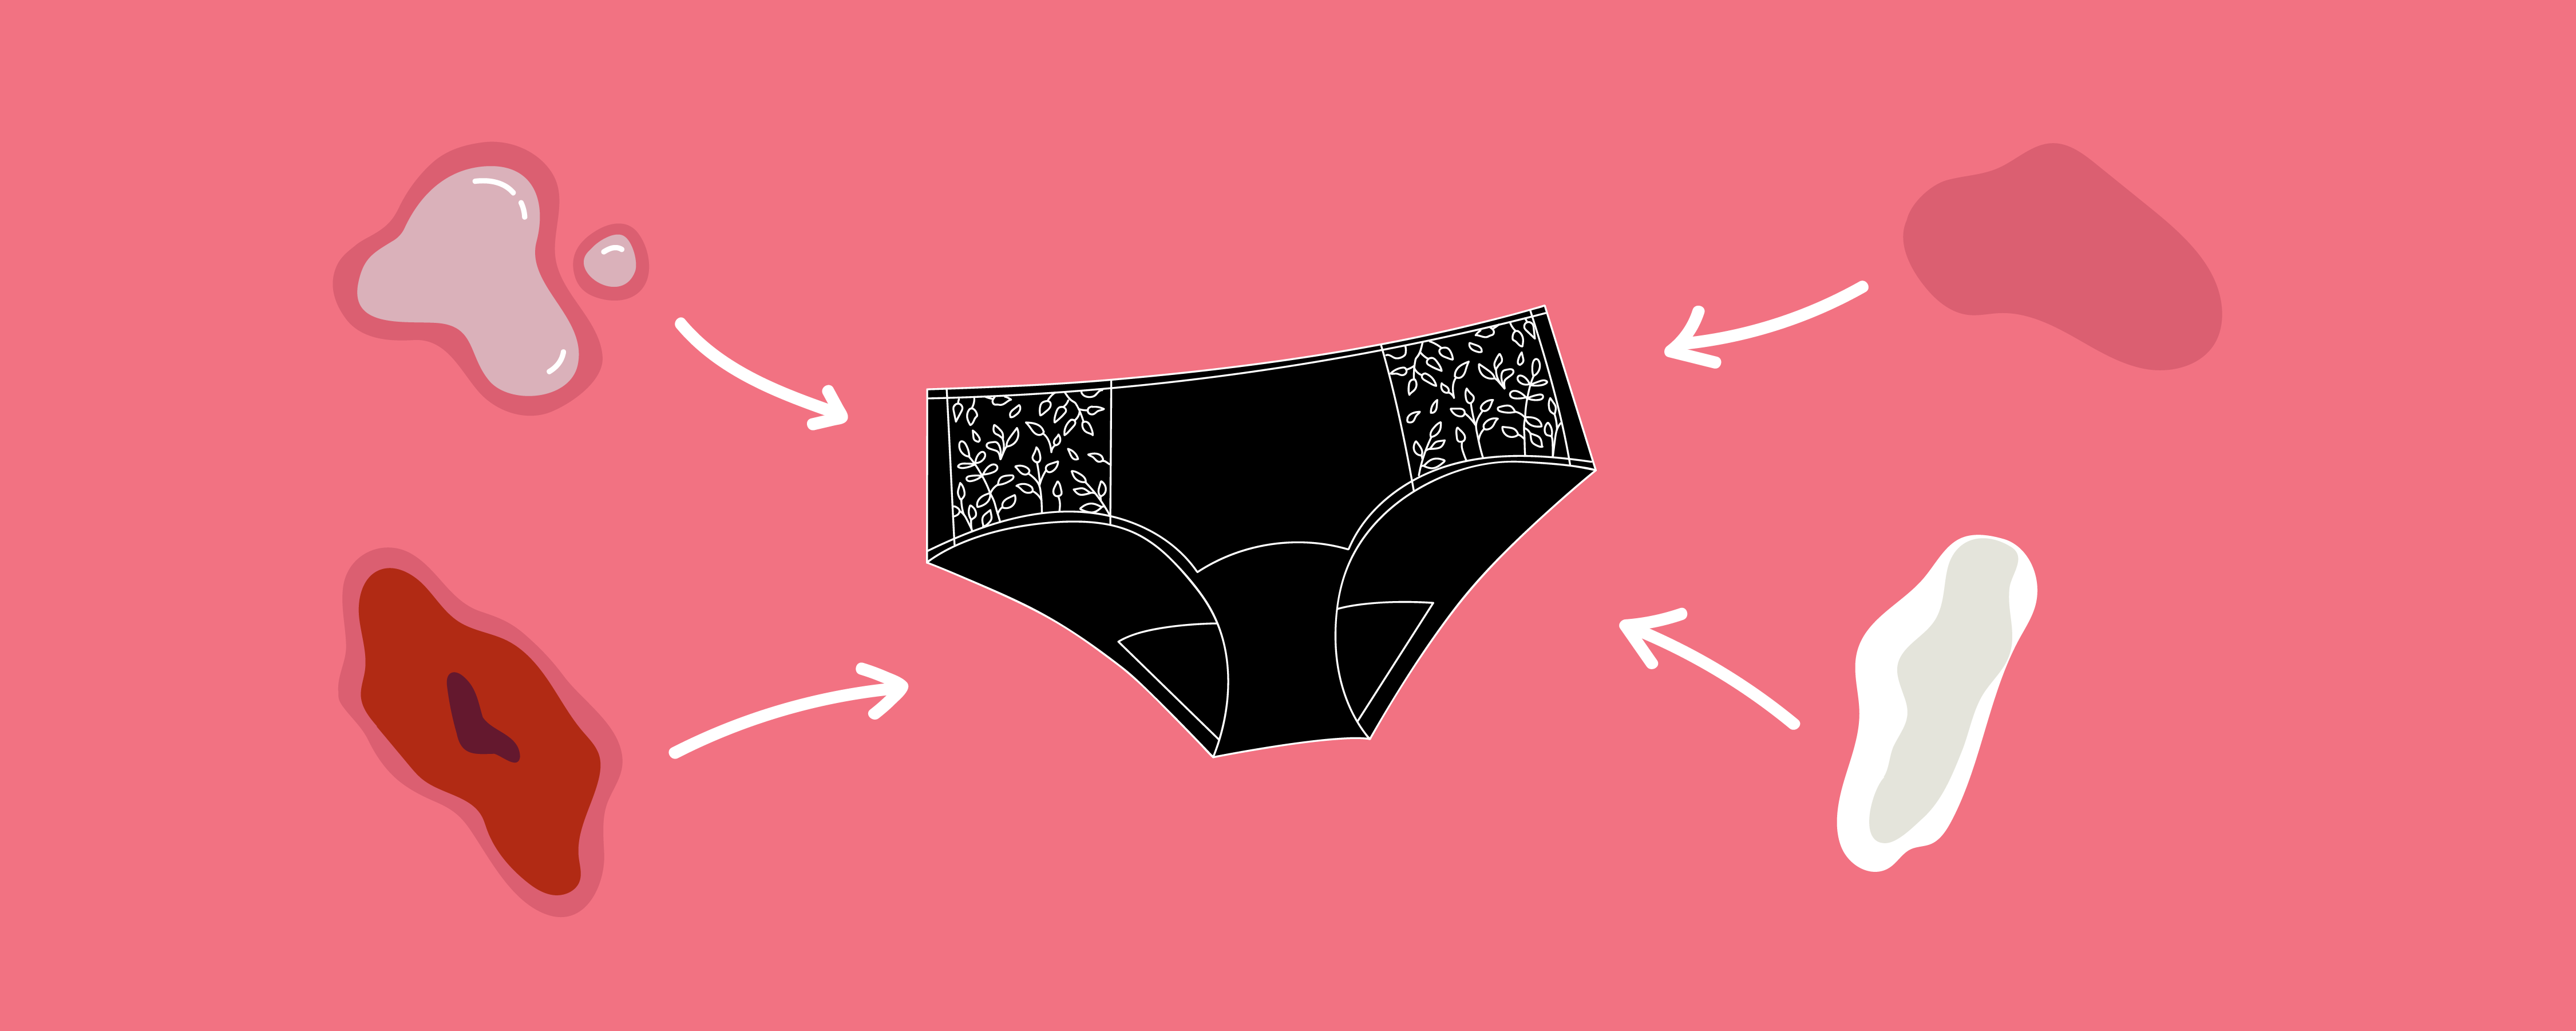 How to use and care for my menstrual panties properly – The Eco Woman